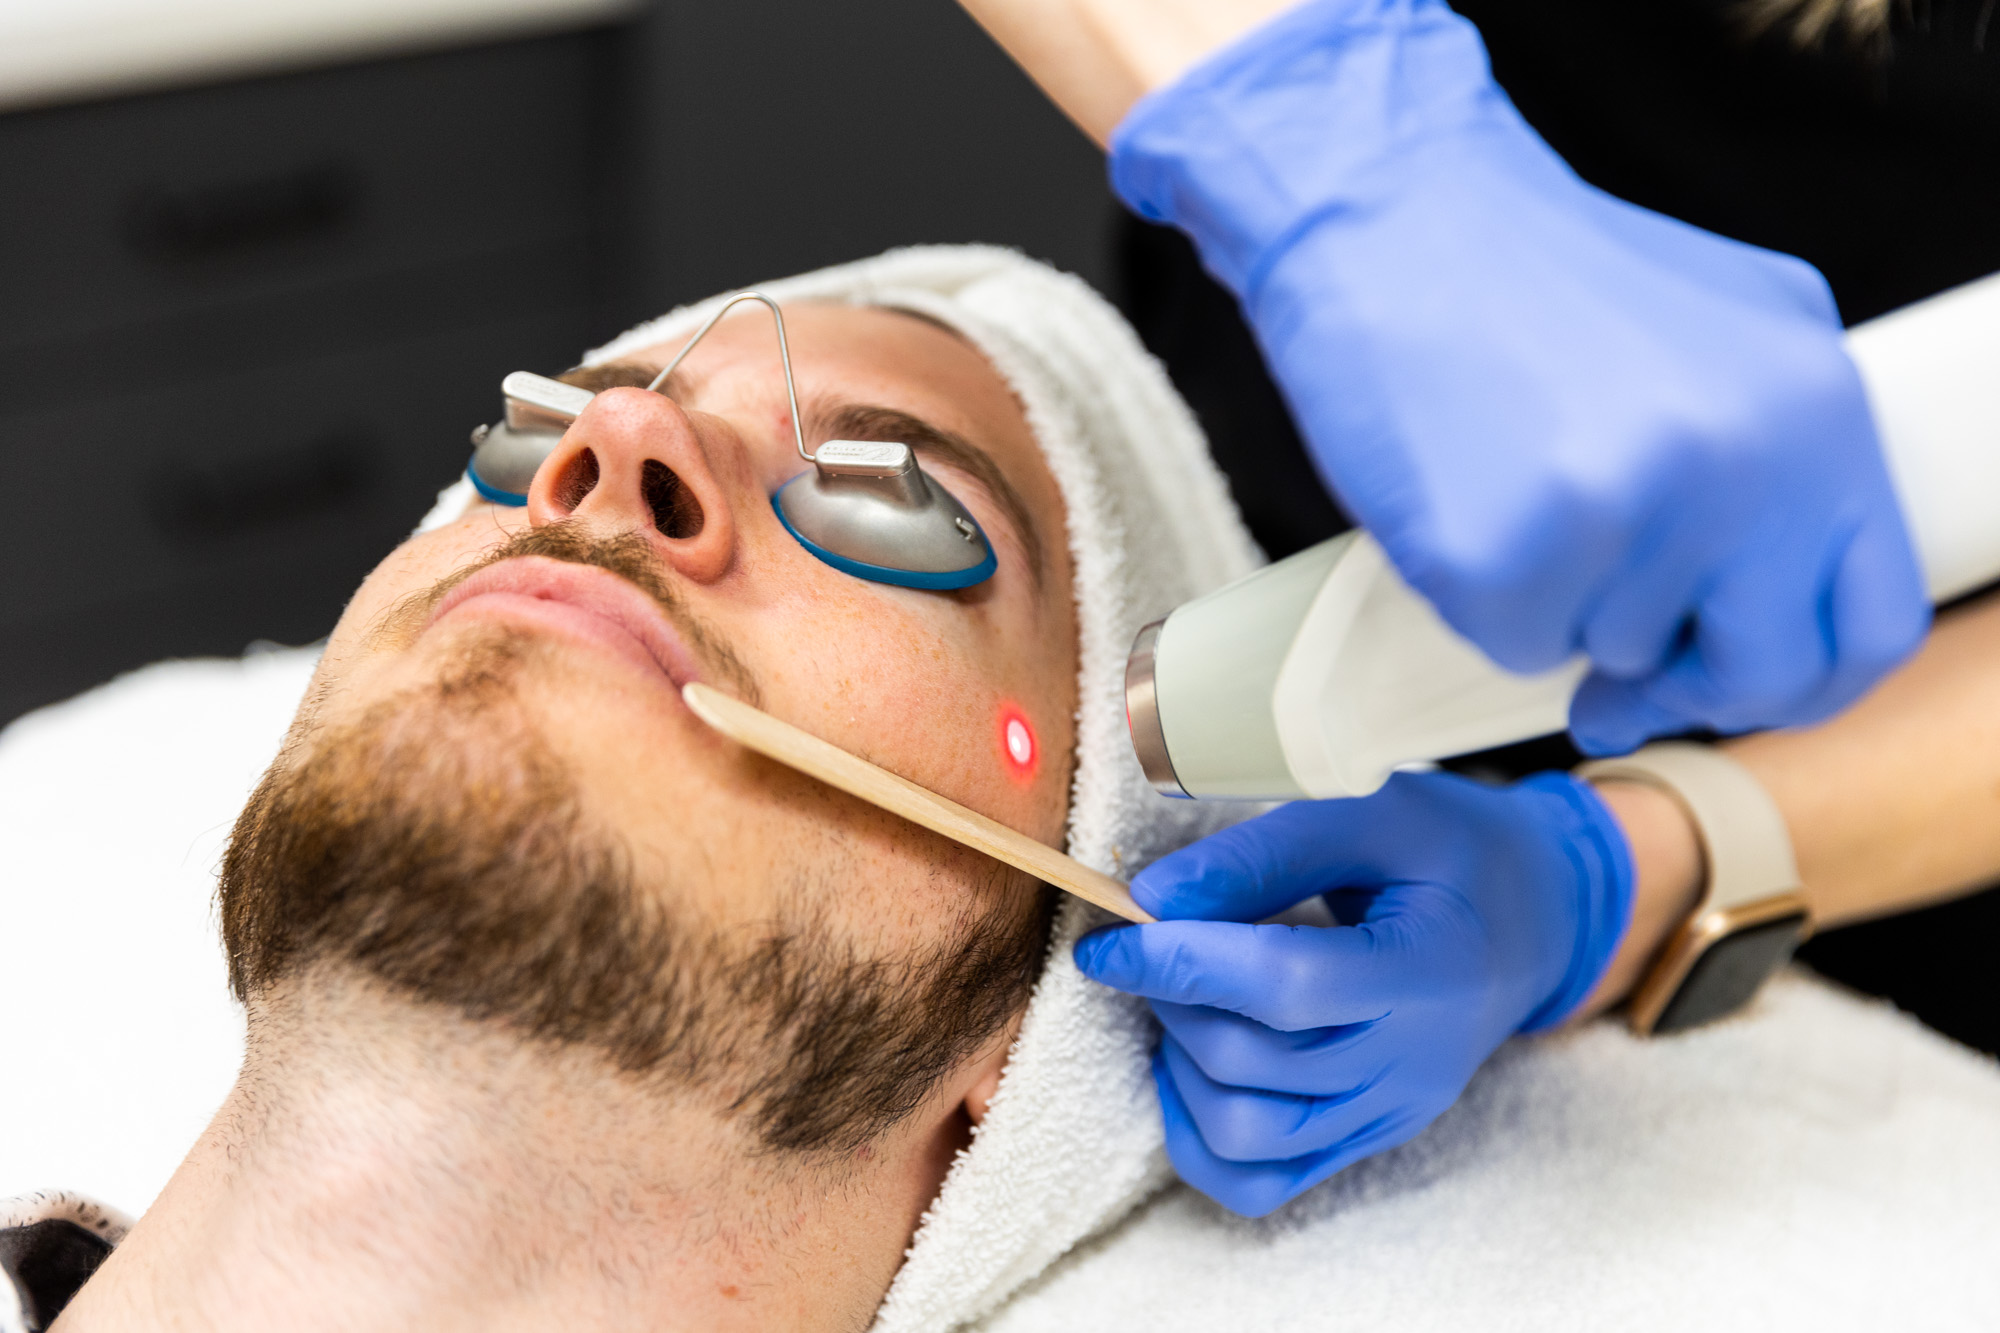 A male client is receiving the Laser Genesis treatment. His face is visible; he is wearing protective eye coverings and a towel over his hair. A medical professional holds the laser tool with one hand, then a popsicle stick along his cheekbone with the other.